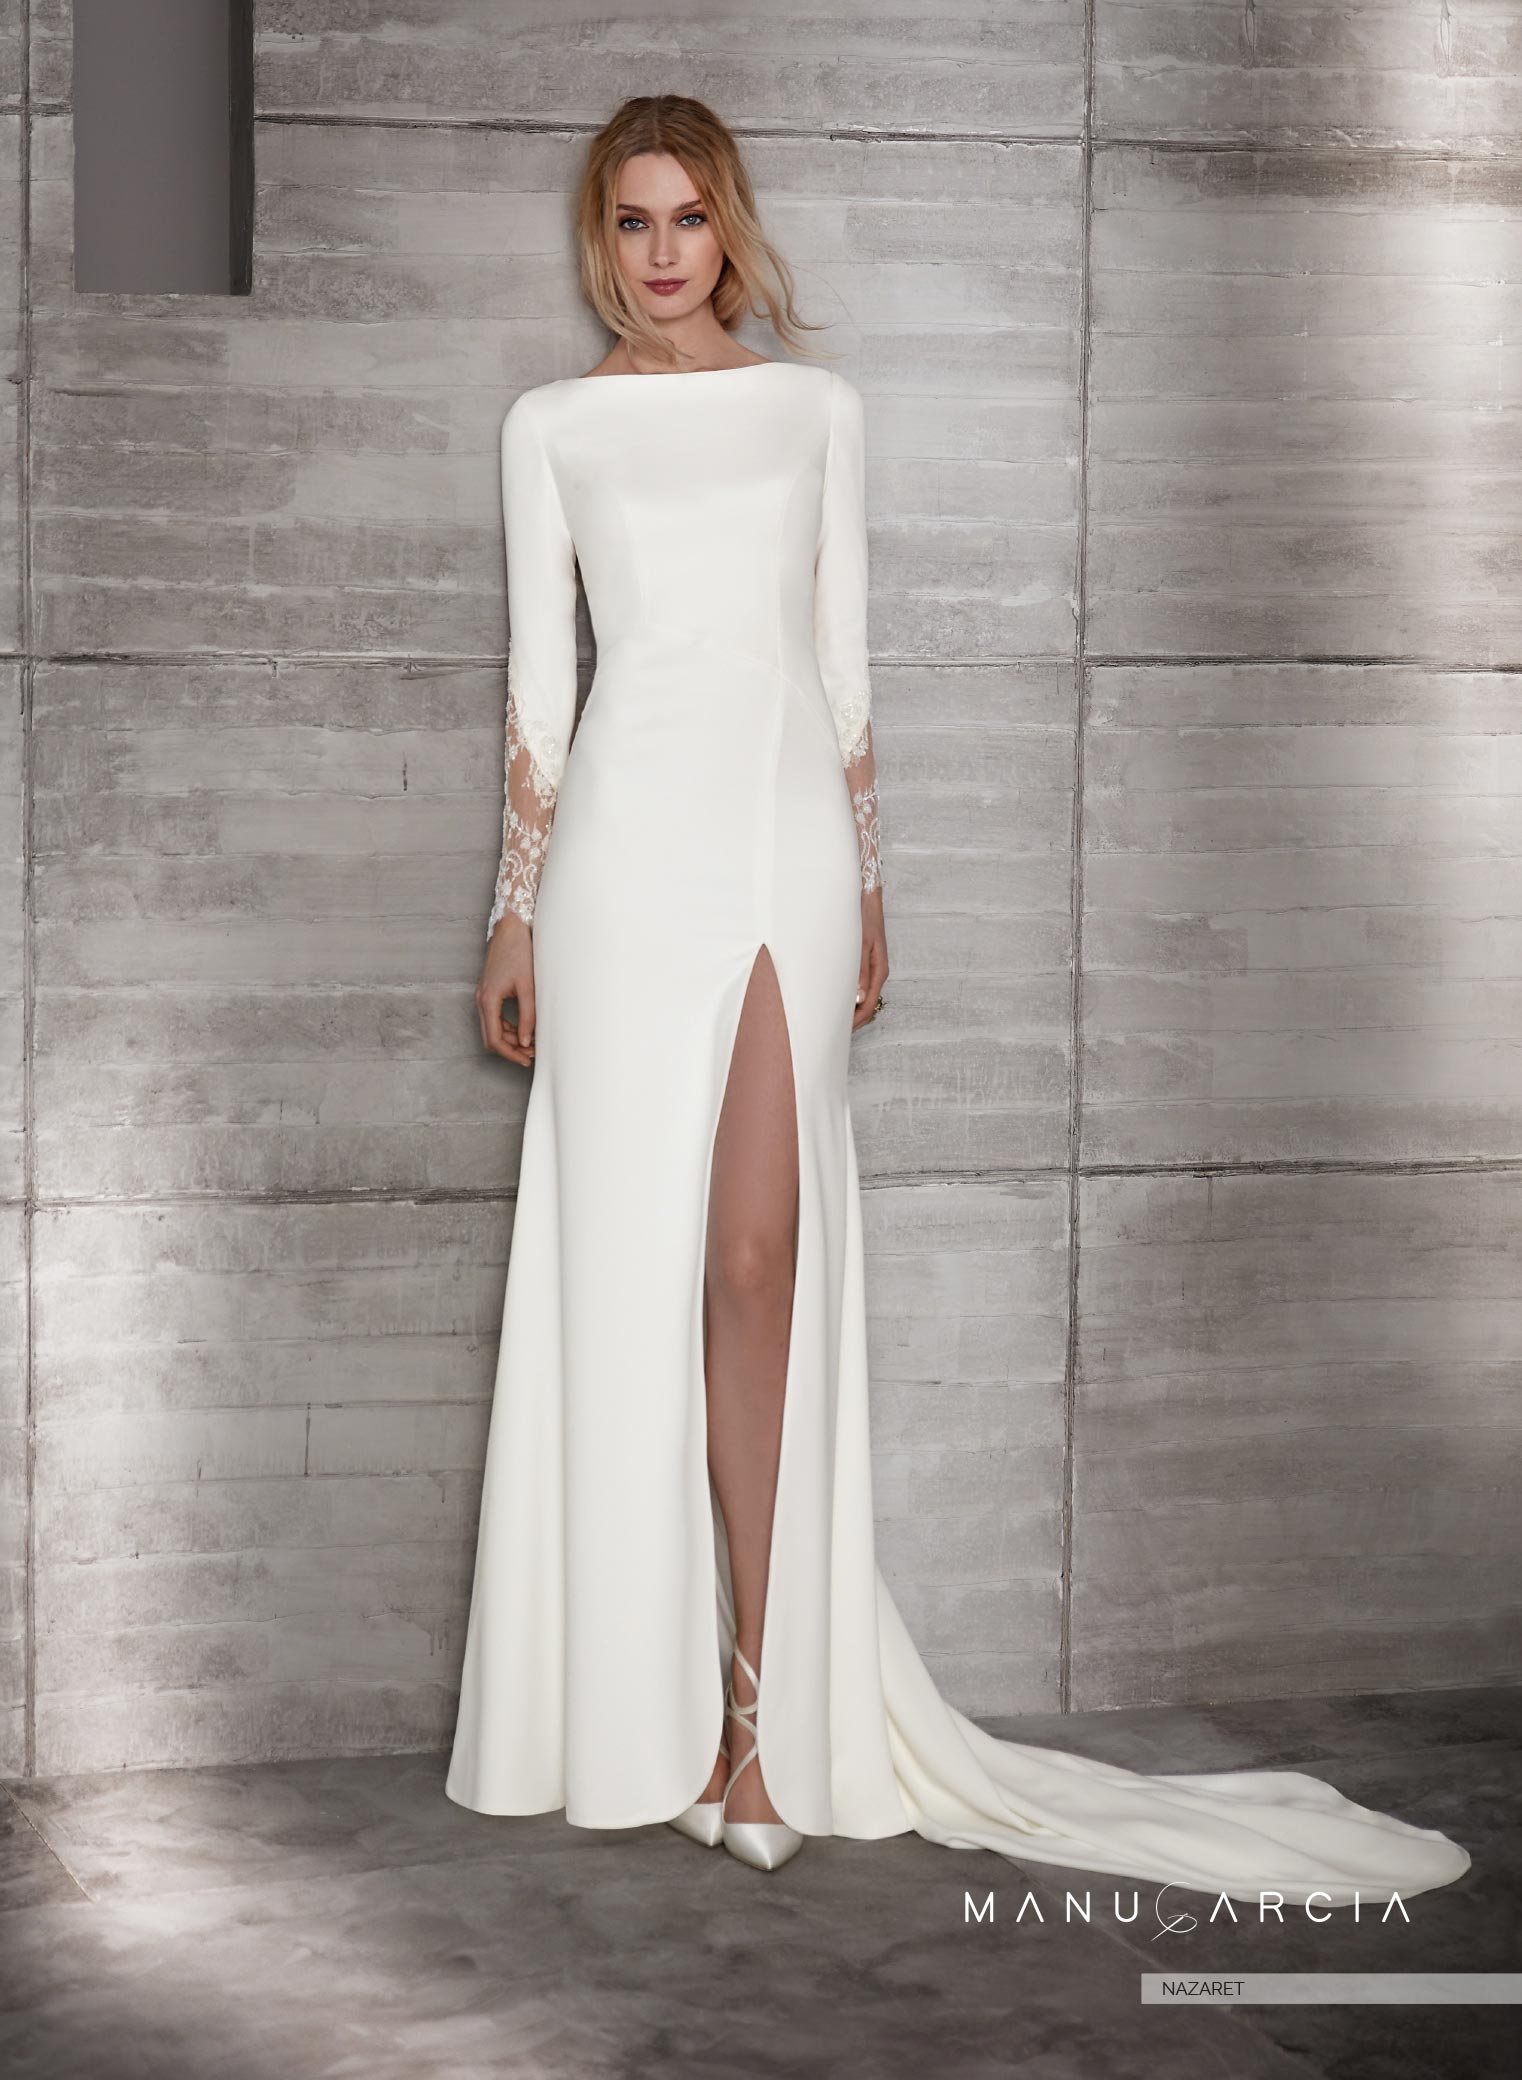 New 2019 bridal collection. Dresses with long sleeves. 1 | Blog HigarNovias